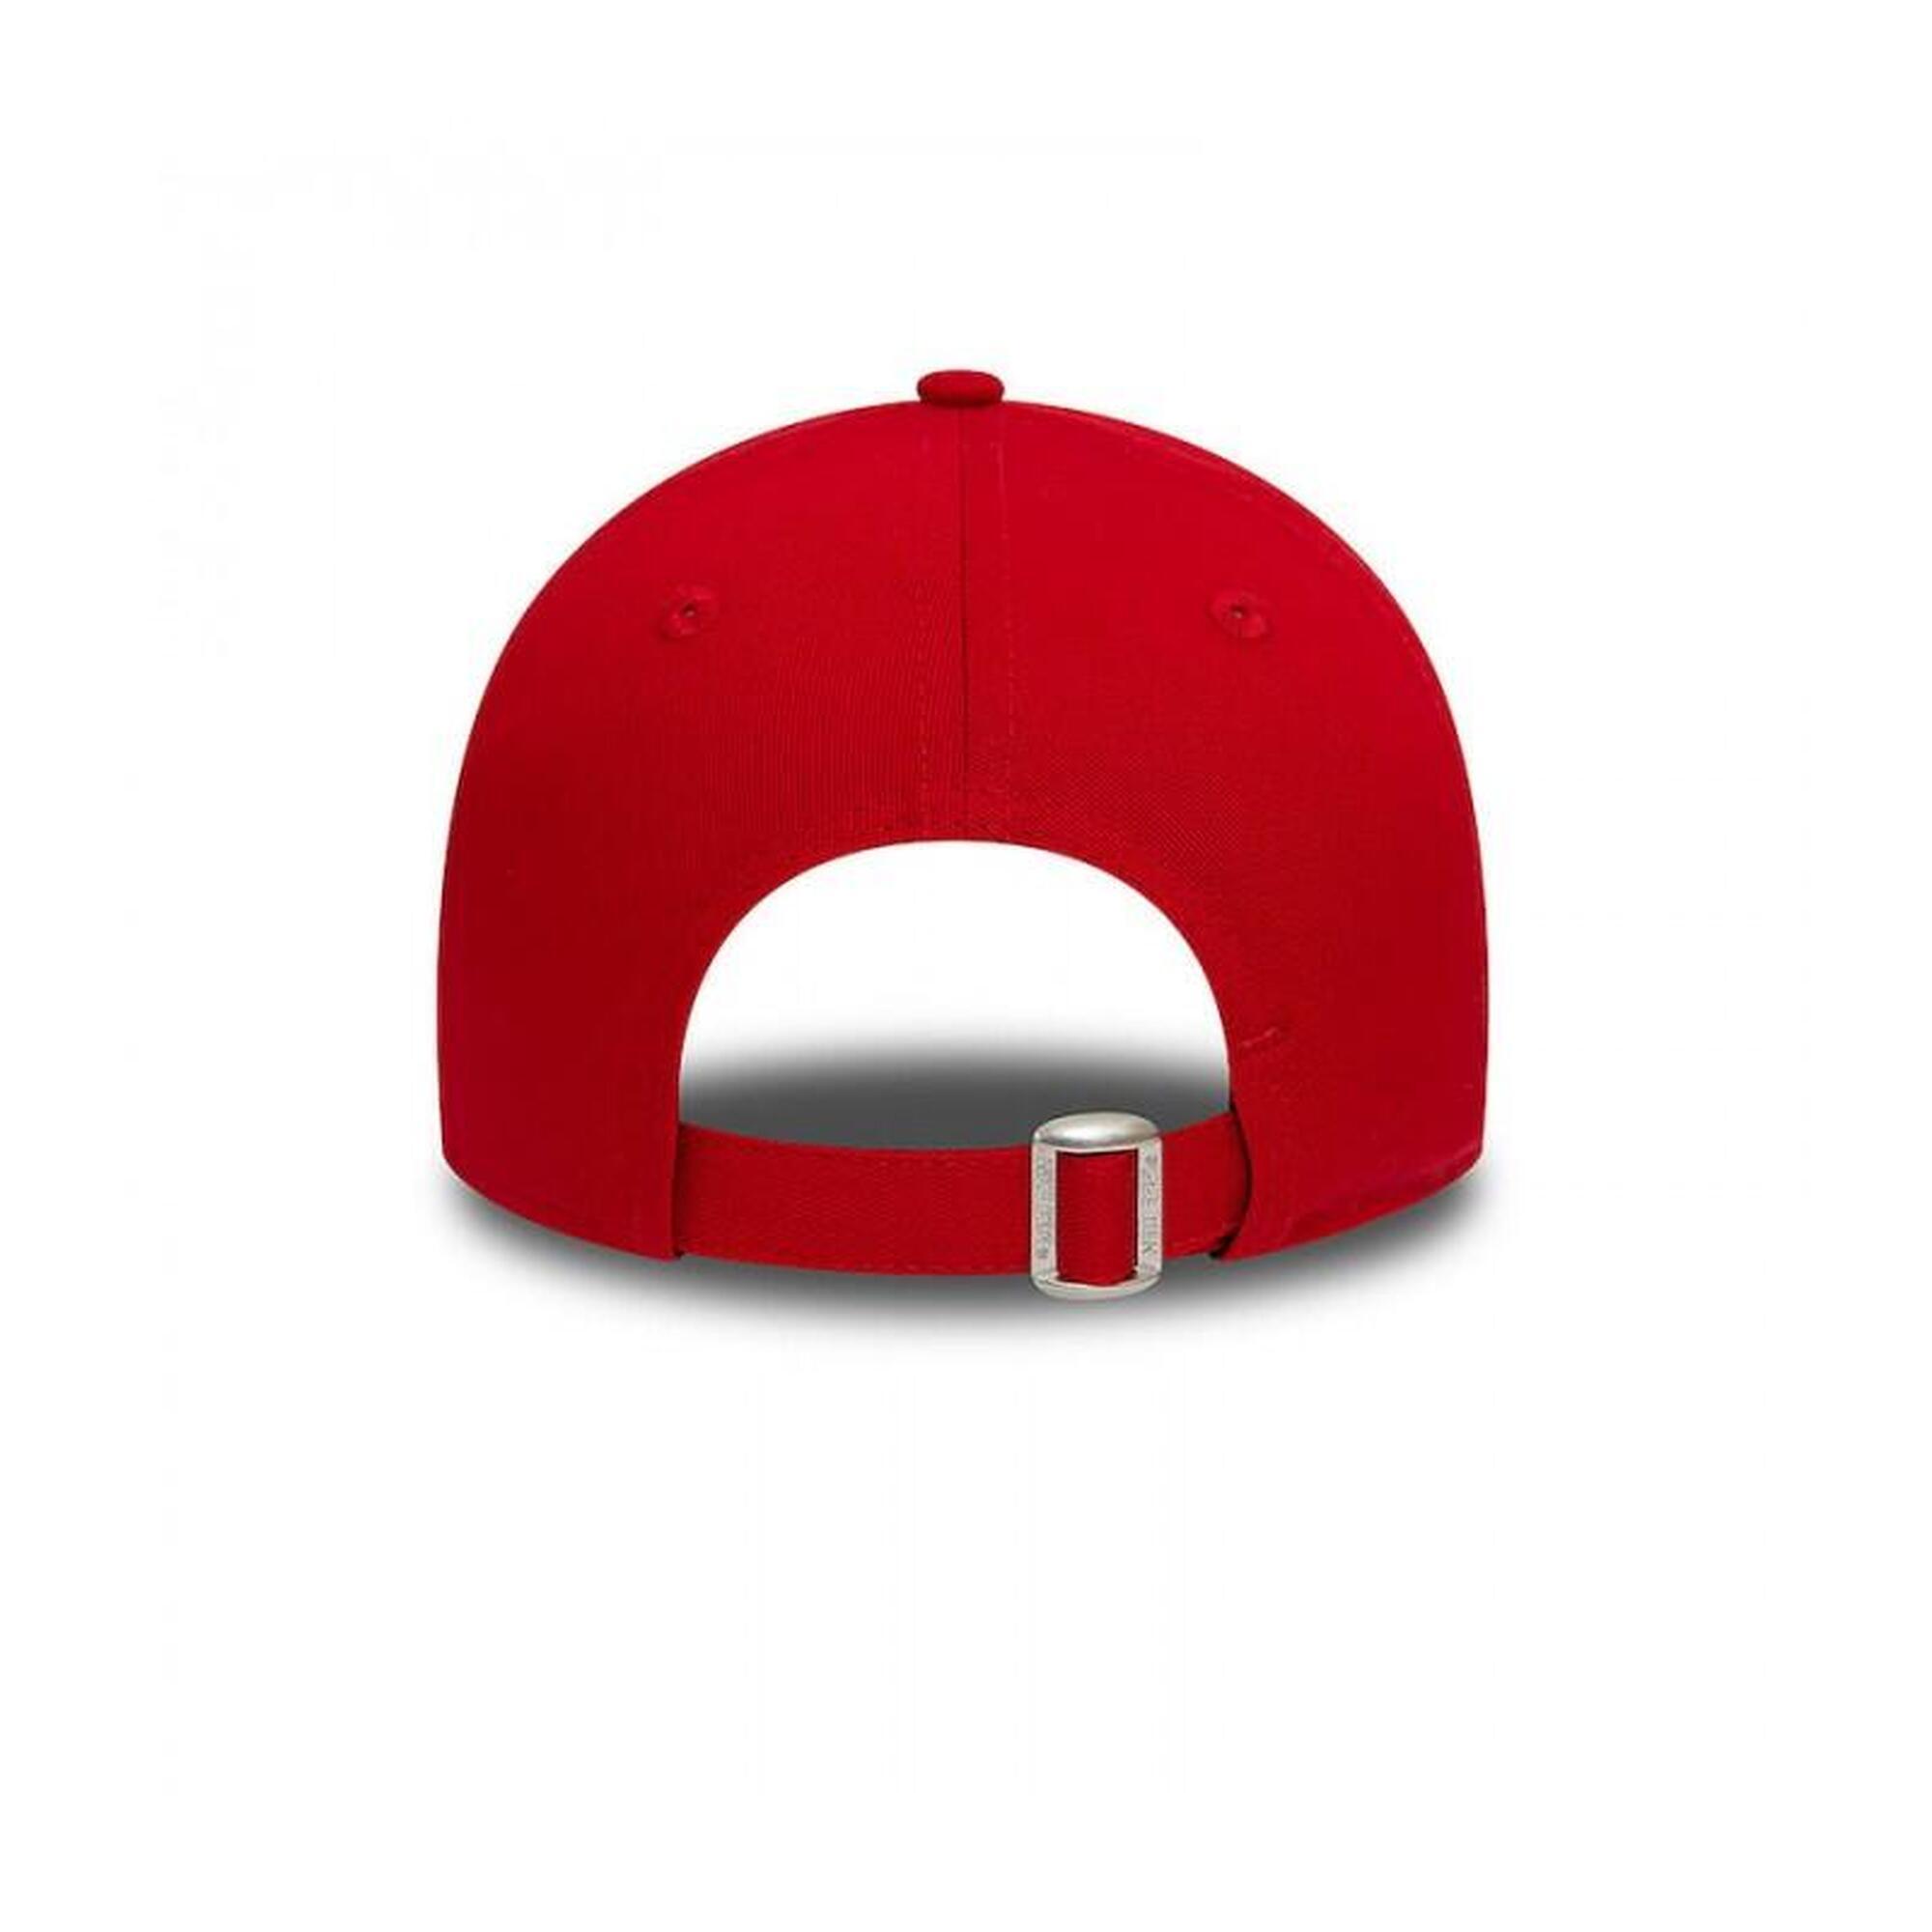 CASQUETTE ROUGE 9FORTY TOULOUSE - ADO - NEW ERA